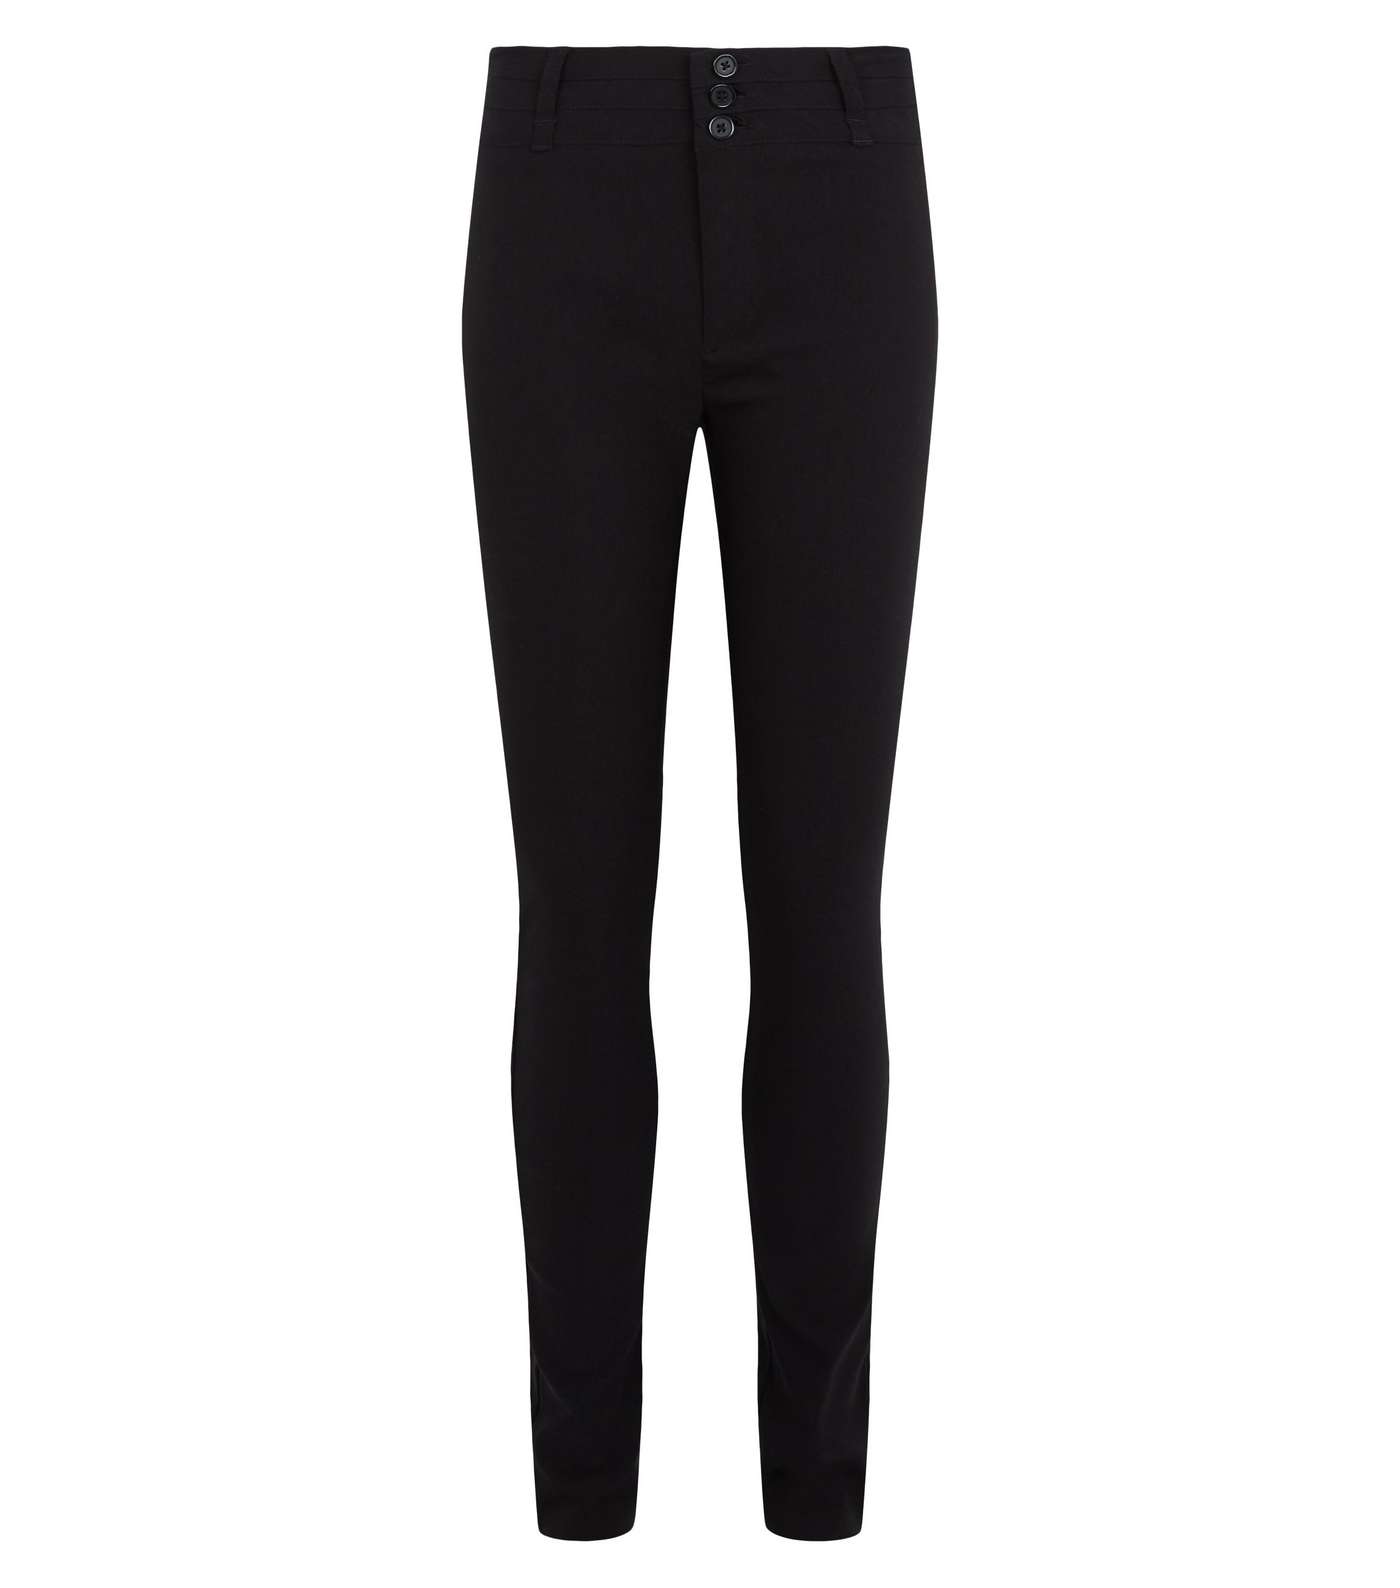 Girls Black 3 Button Super Skinny Trousers Image 4